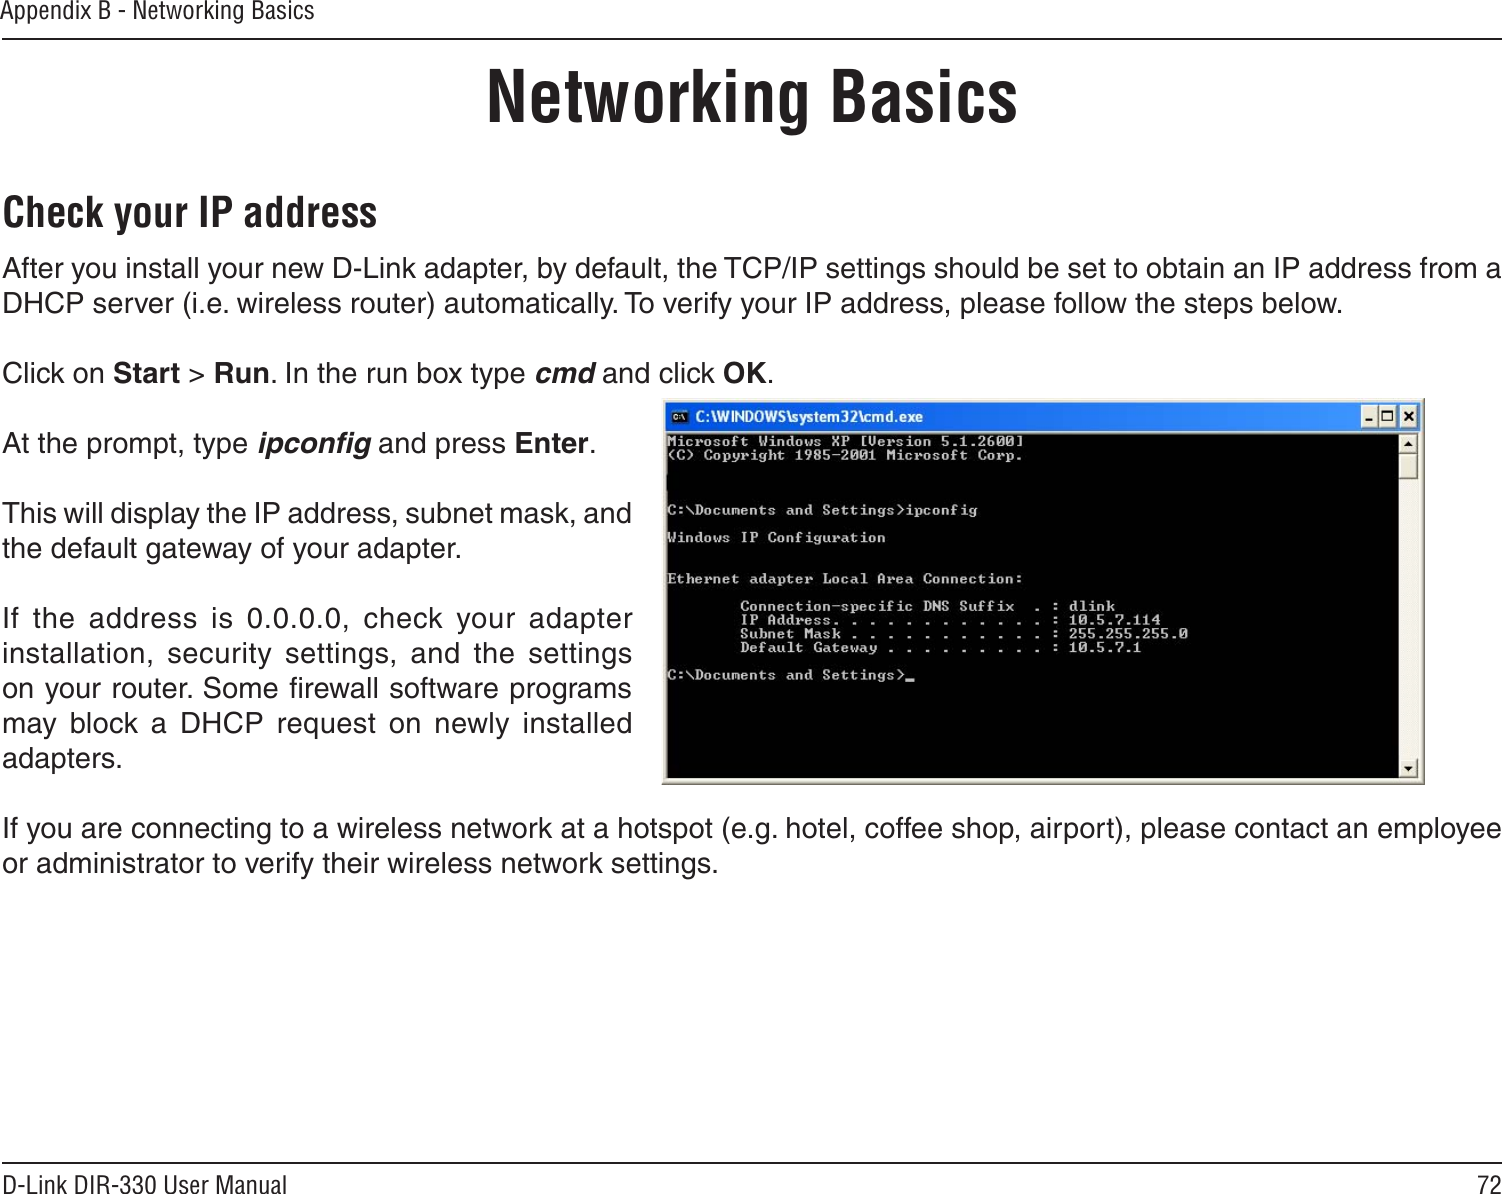 72D-Link DIR-330 User ManualAppendix B - Networking BasicsNetworking BasicsCheck your IP addressAfter you install your new D-Link adapter, by default, the TCP/IP settings should be set to obtain an IP address from a DHCP server (i.e. wireless router) automatically. To verify your IP address, please follow the steps below.Click on Start &gt; Run. In the run box type cmd and click OK.At the prompt, type ipconﬁg and press Enter.This will display the IP address, subnet mask, and the default gateway of your adapter.If  the  address  is  0.0.0.0,  check  your  adapter installation,  security  settings,  and  the  settings on your router. Some ﬁrewall software programs may  block  a  DHCP  request  on  newly  installed adapters. If you are connecting to a wireless network at a hotspot (e.g. hotel, coffee shop, airport), please contact an employee or administrator to verify their wireless network settings.